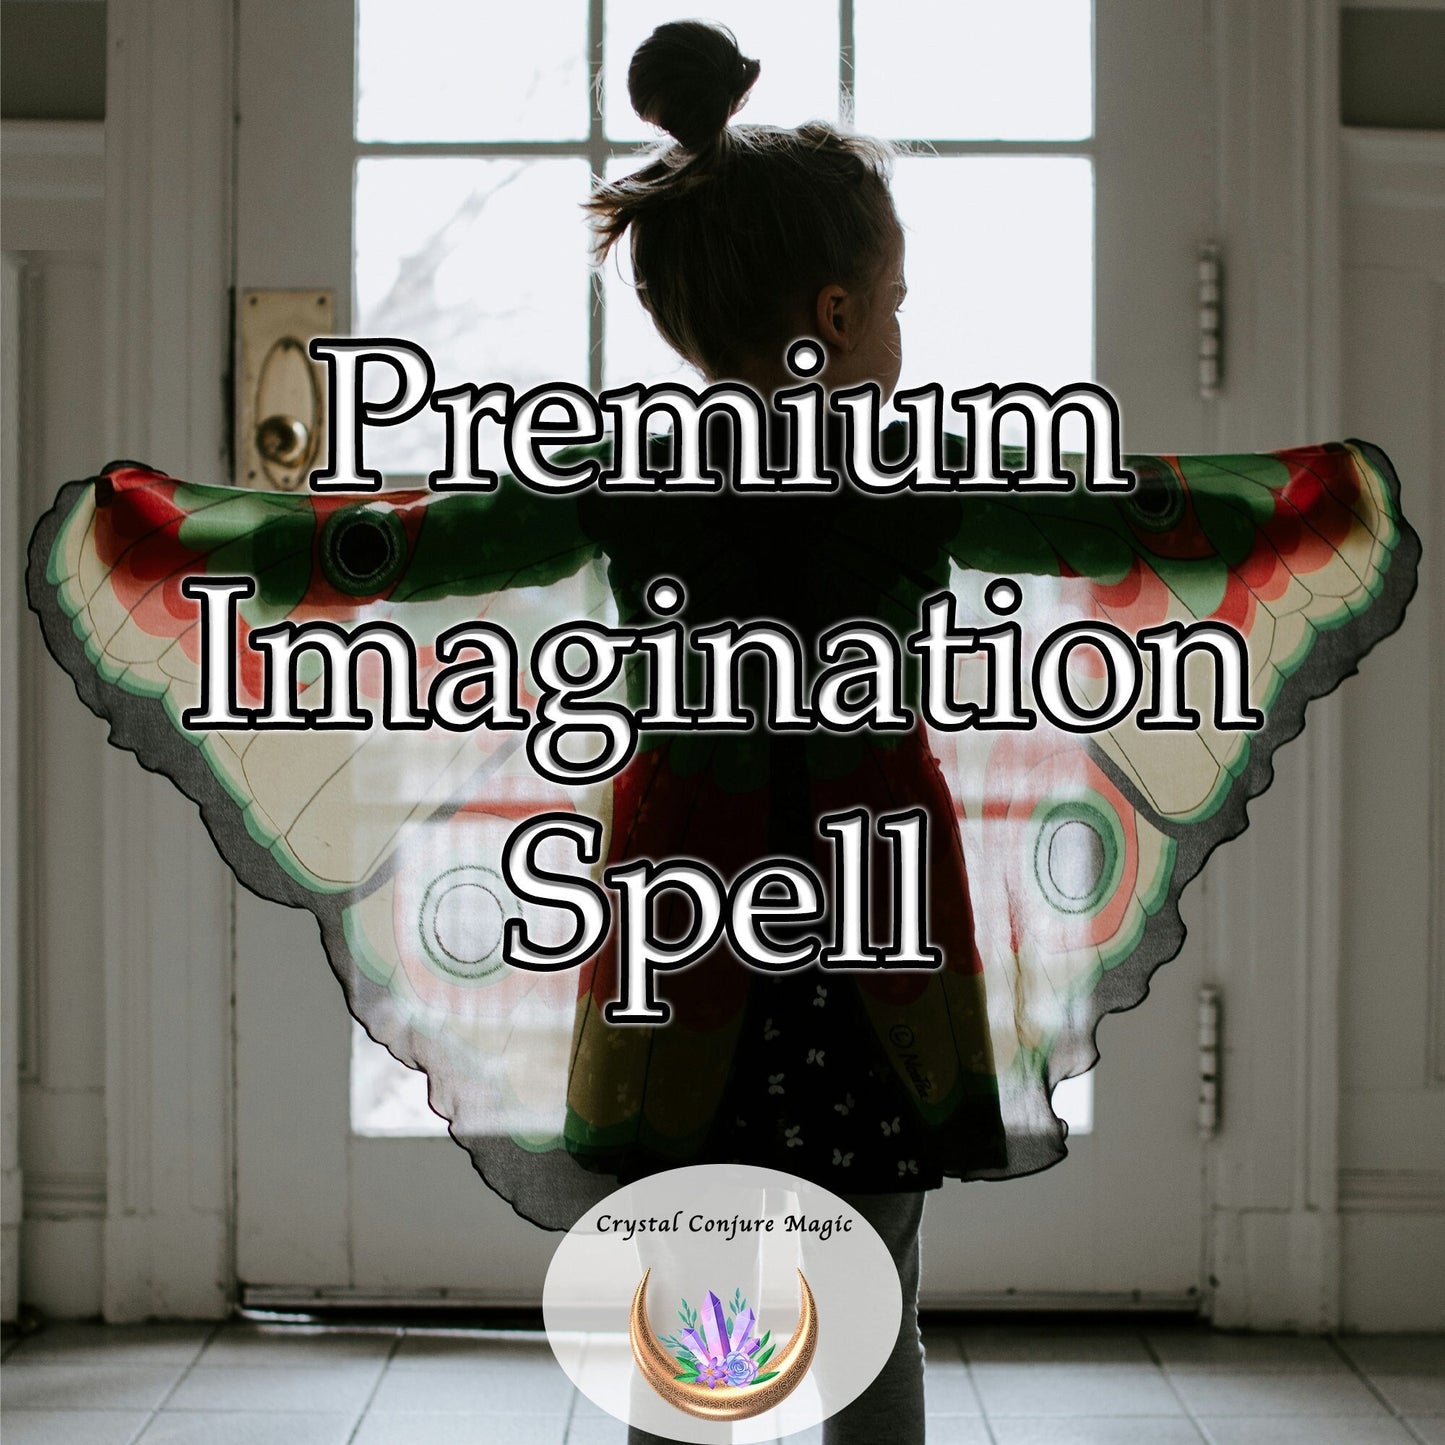 Premium Imagination Spell - delve into the deepest corners of your mind, and discover new perspectives